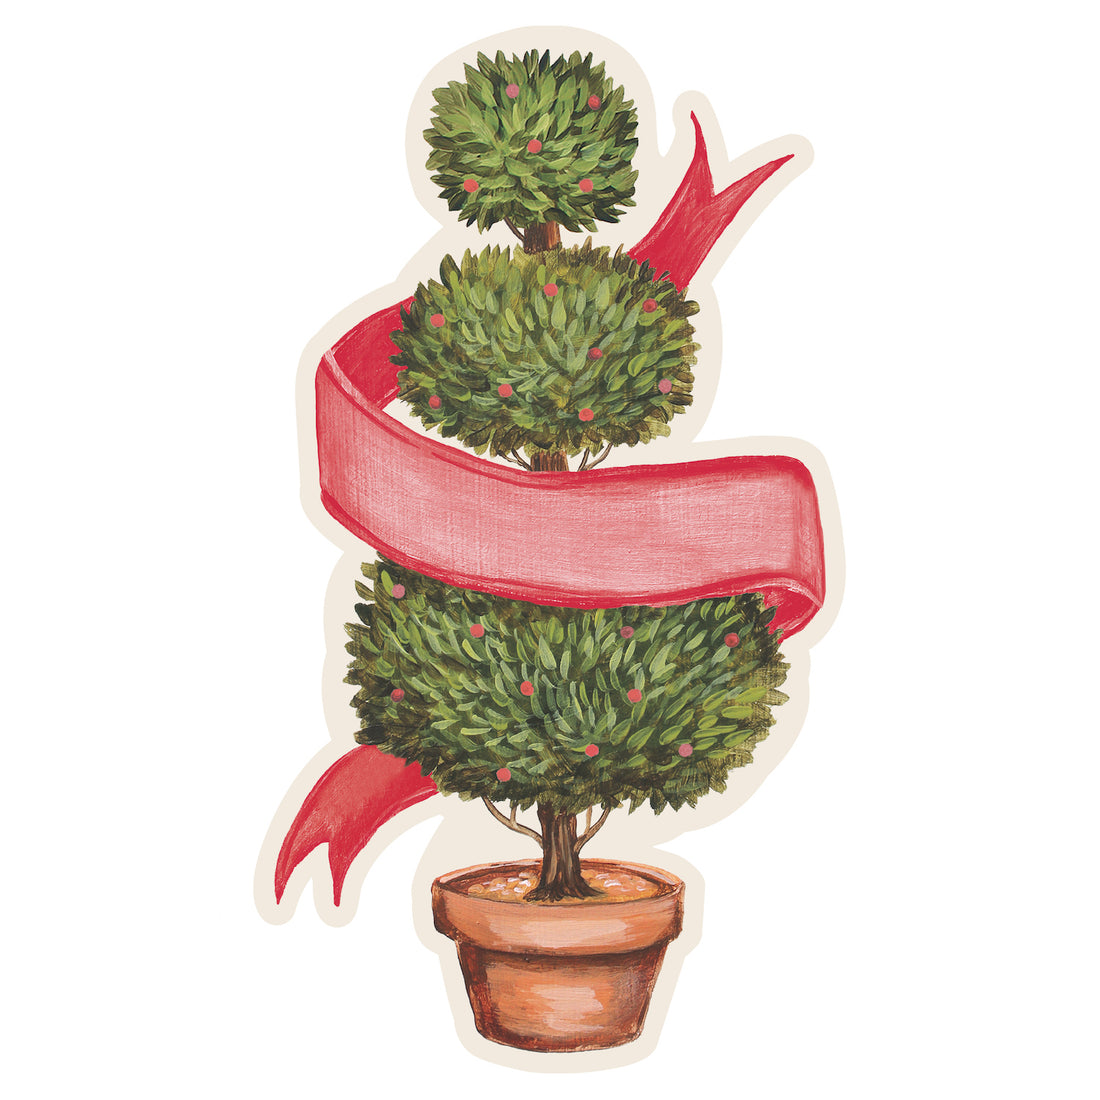 A die-cut illustration of a potted shrub with red berries manicured into three balls, with a blank red ribbon twisting around the topiary, creating a space for personalization.